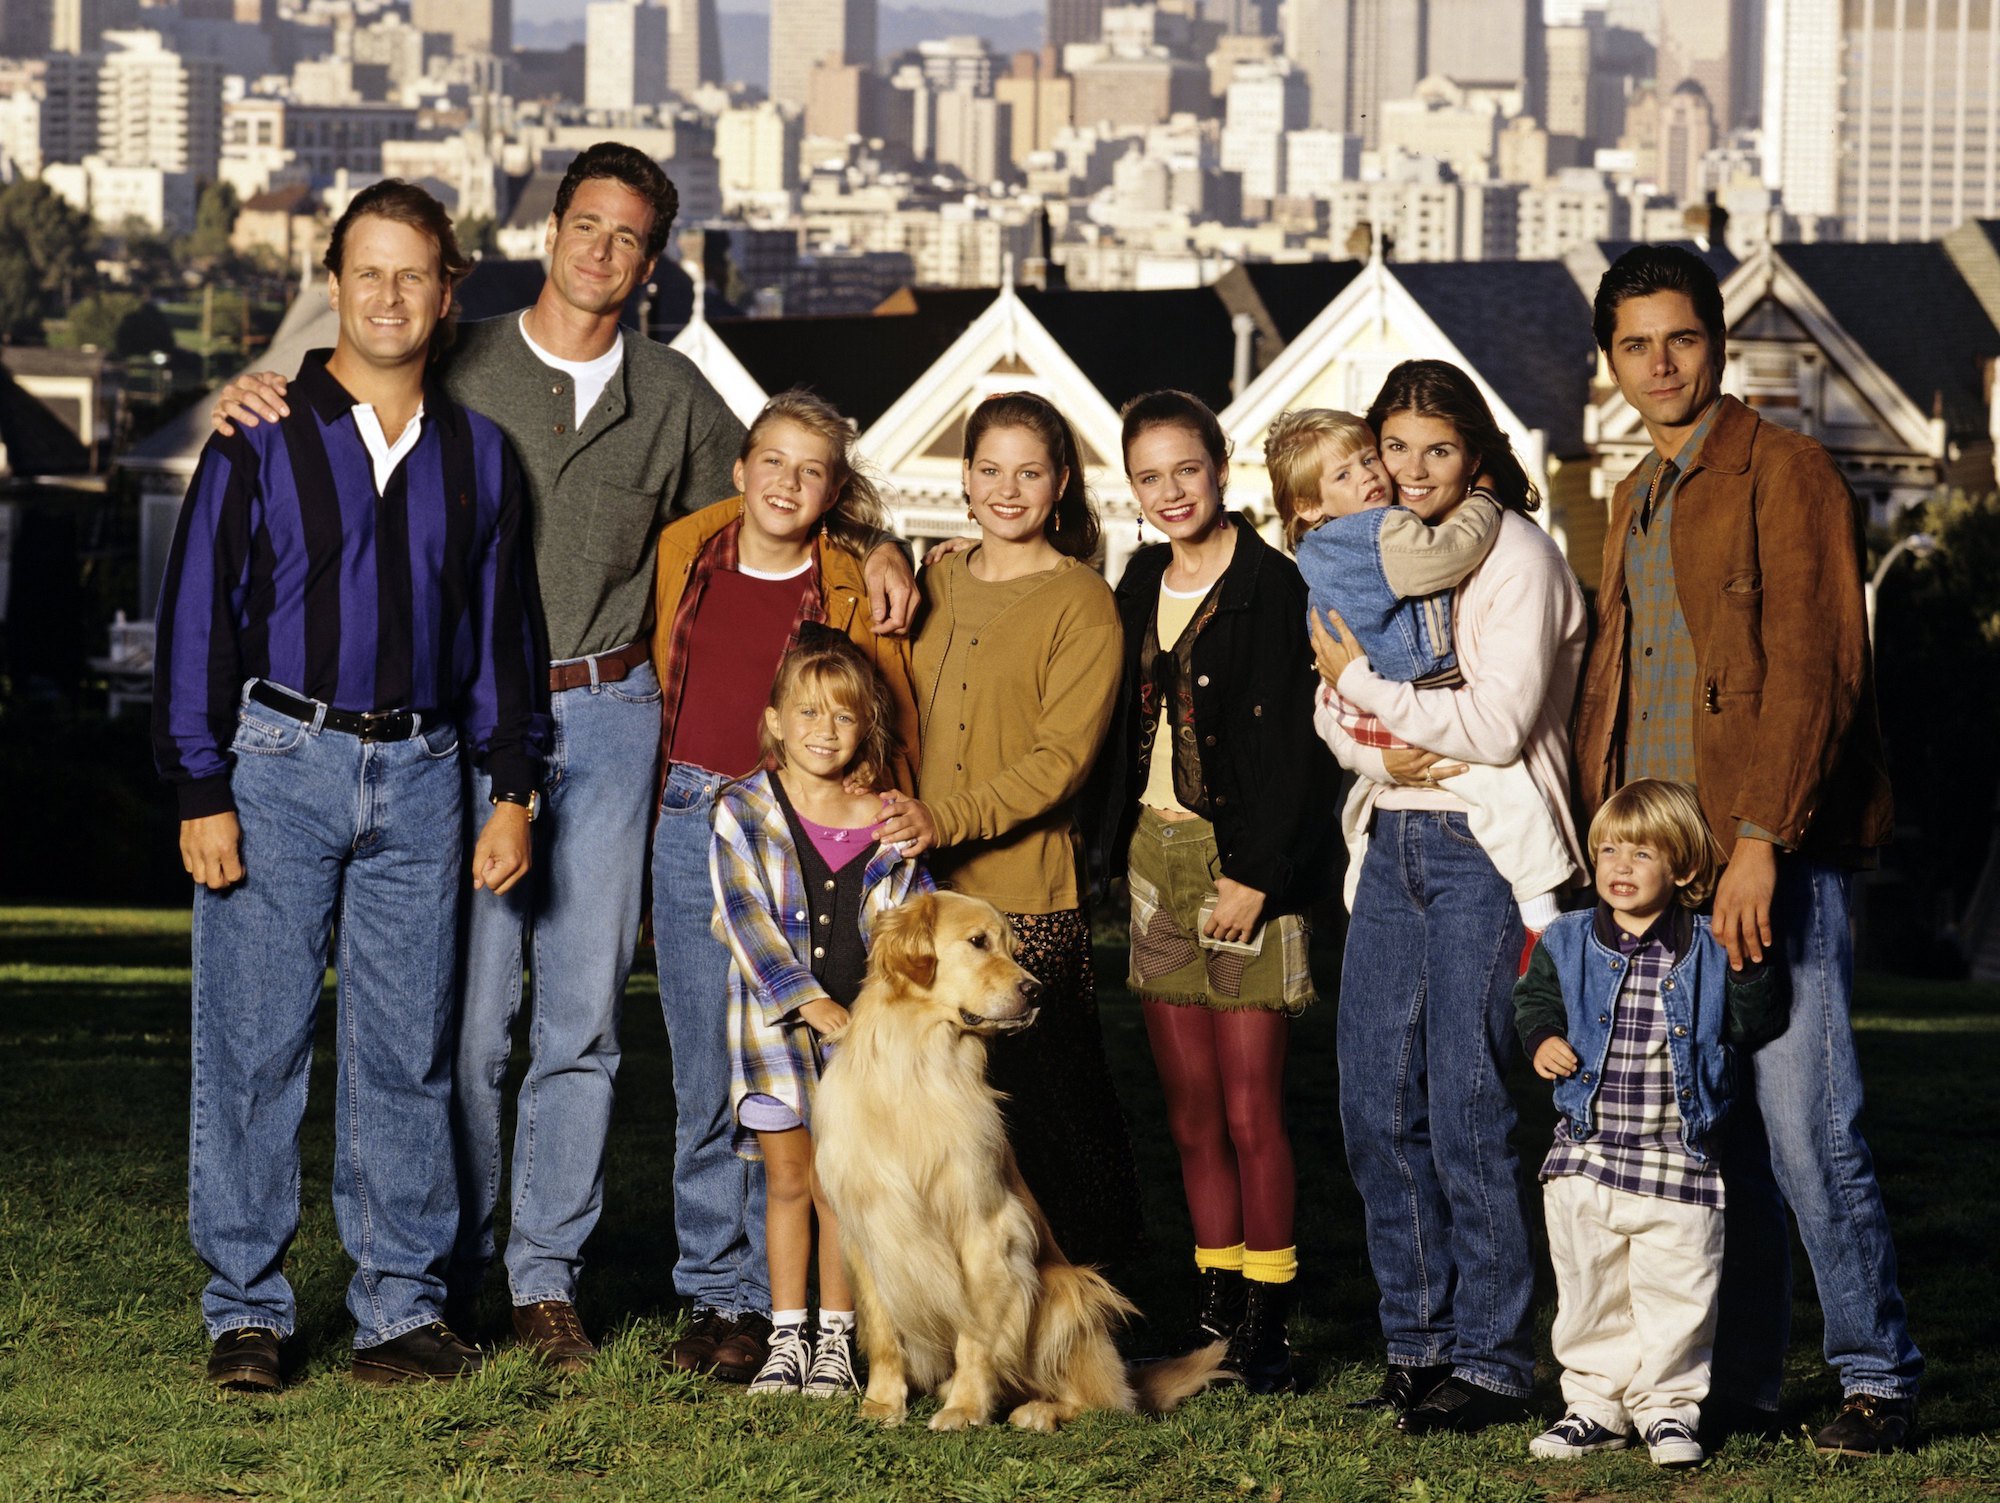 (L-R) Dave Coulier (Joey), Bob Saget (Danny), Jodie Sweetin (Stephanie), Mary Kate Olsen (Michelle), Candace Cameron (D.J.), Andrea Barber (Kimmy), Blake Tuomy-Wilhoit (Nicky), Lori Loughlin (Rebecca), Dylan Tuomy-Wilhoit (Alex), John Stamos (Jesse) smiling in front of the famed 'Full House' houses